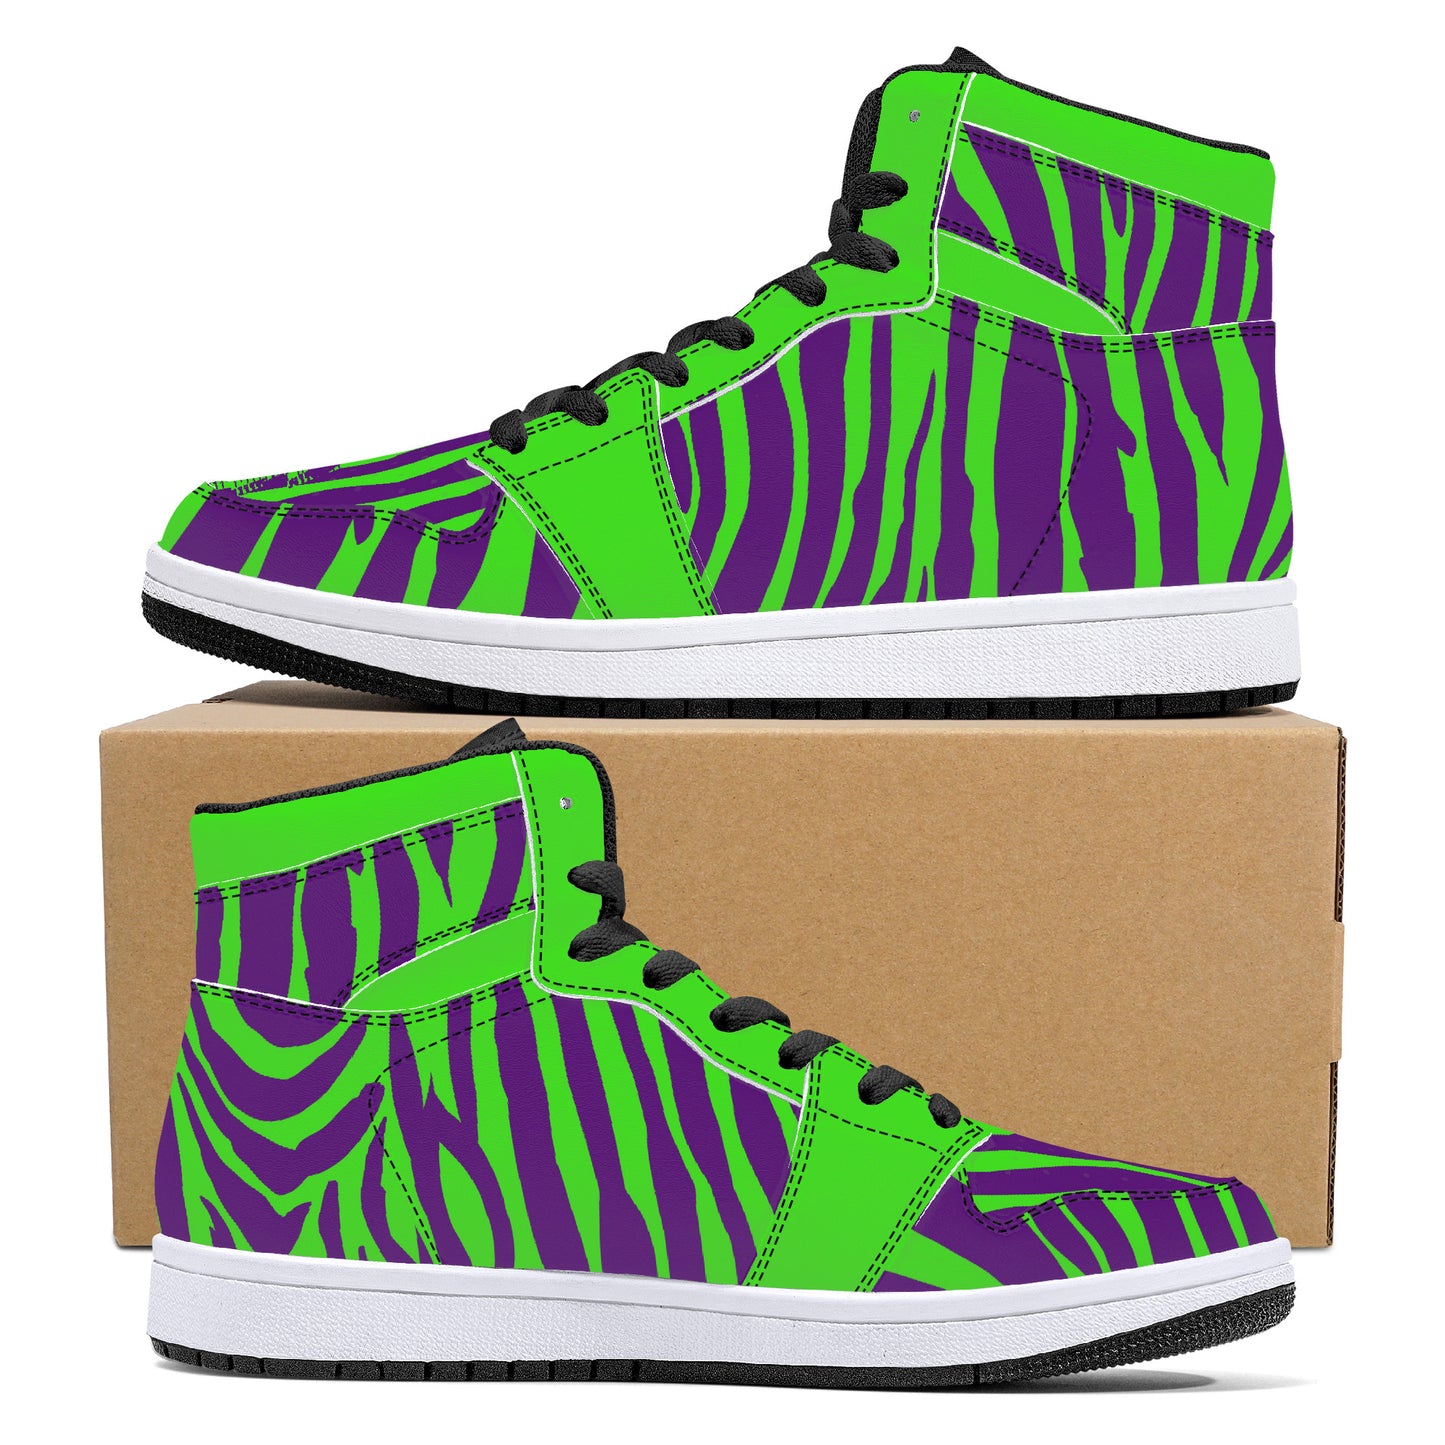 "Zebra" High-Top Synthetic Leather Sneakers